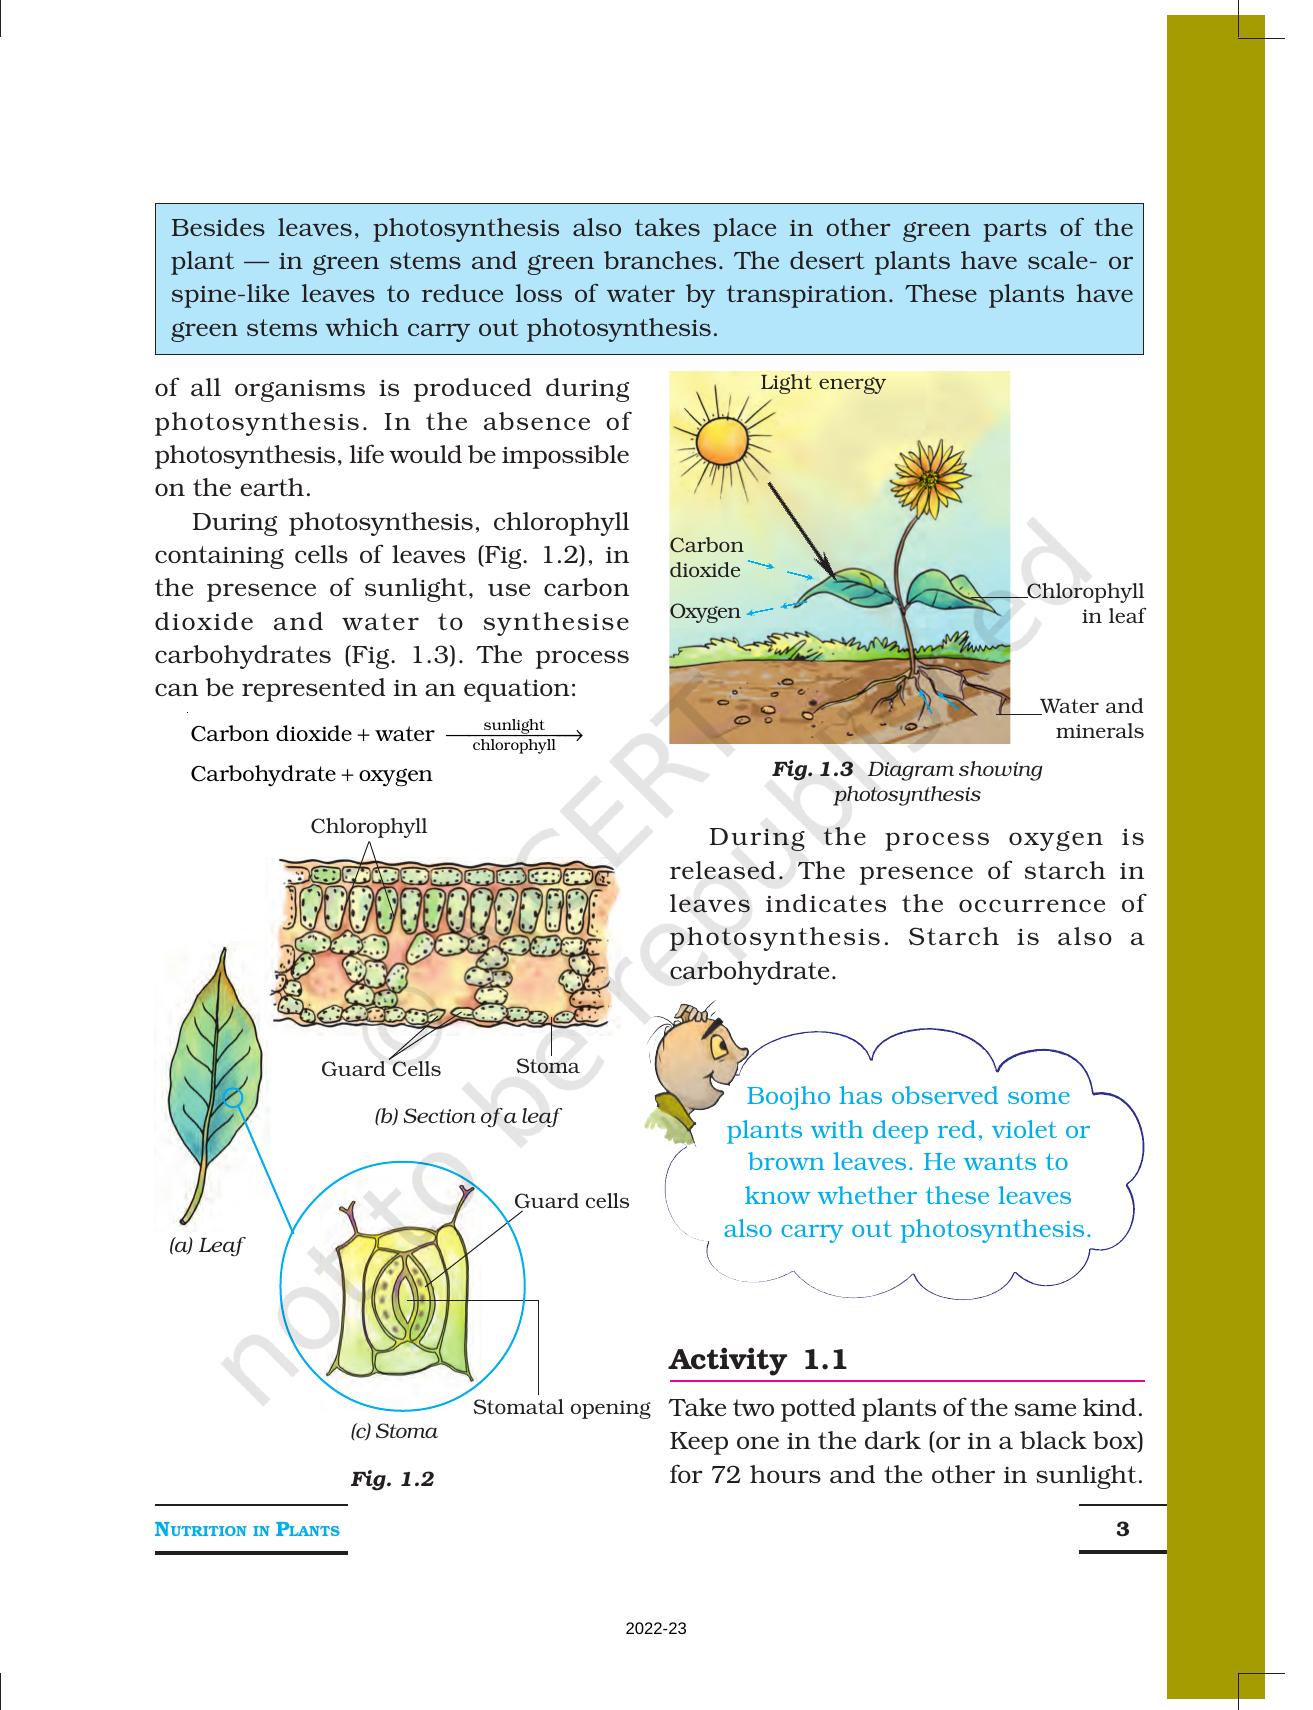 NCERT Book for Class 7 Science: Chapter 1-Nutrition in Plants - Page 3